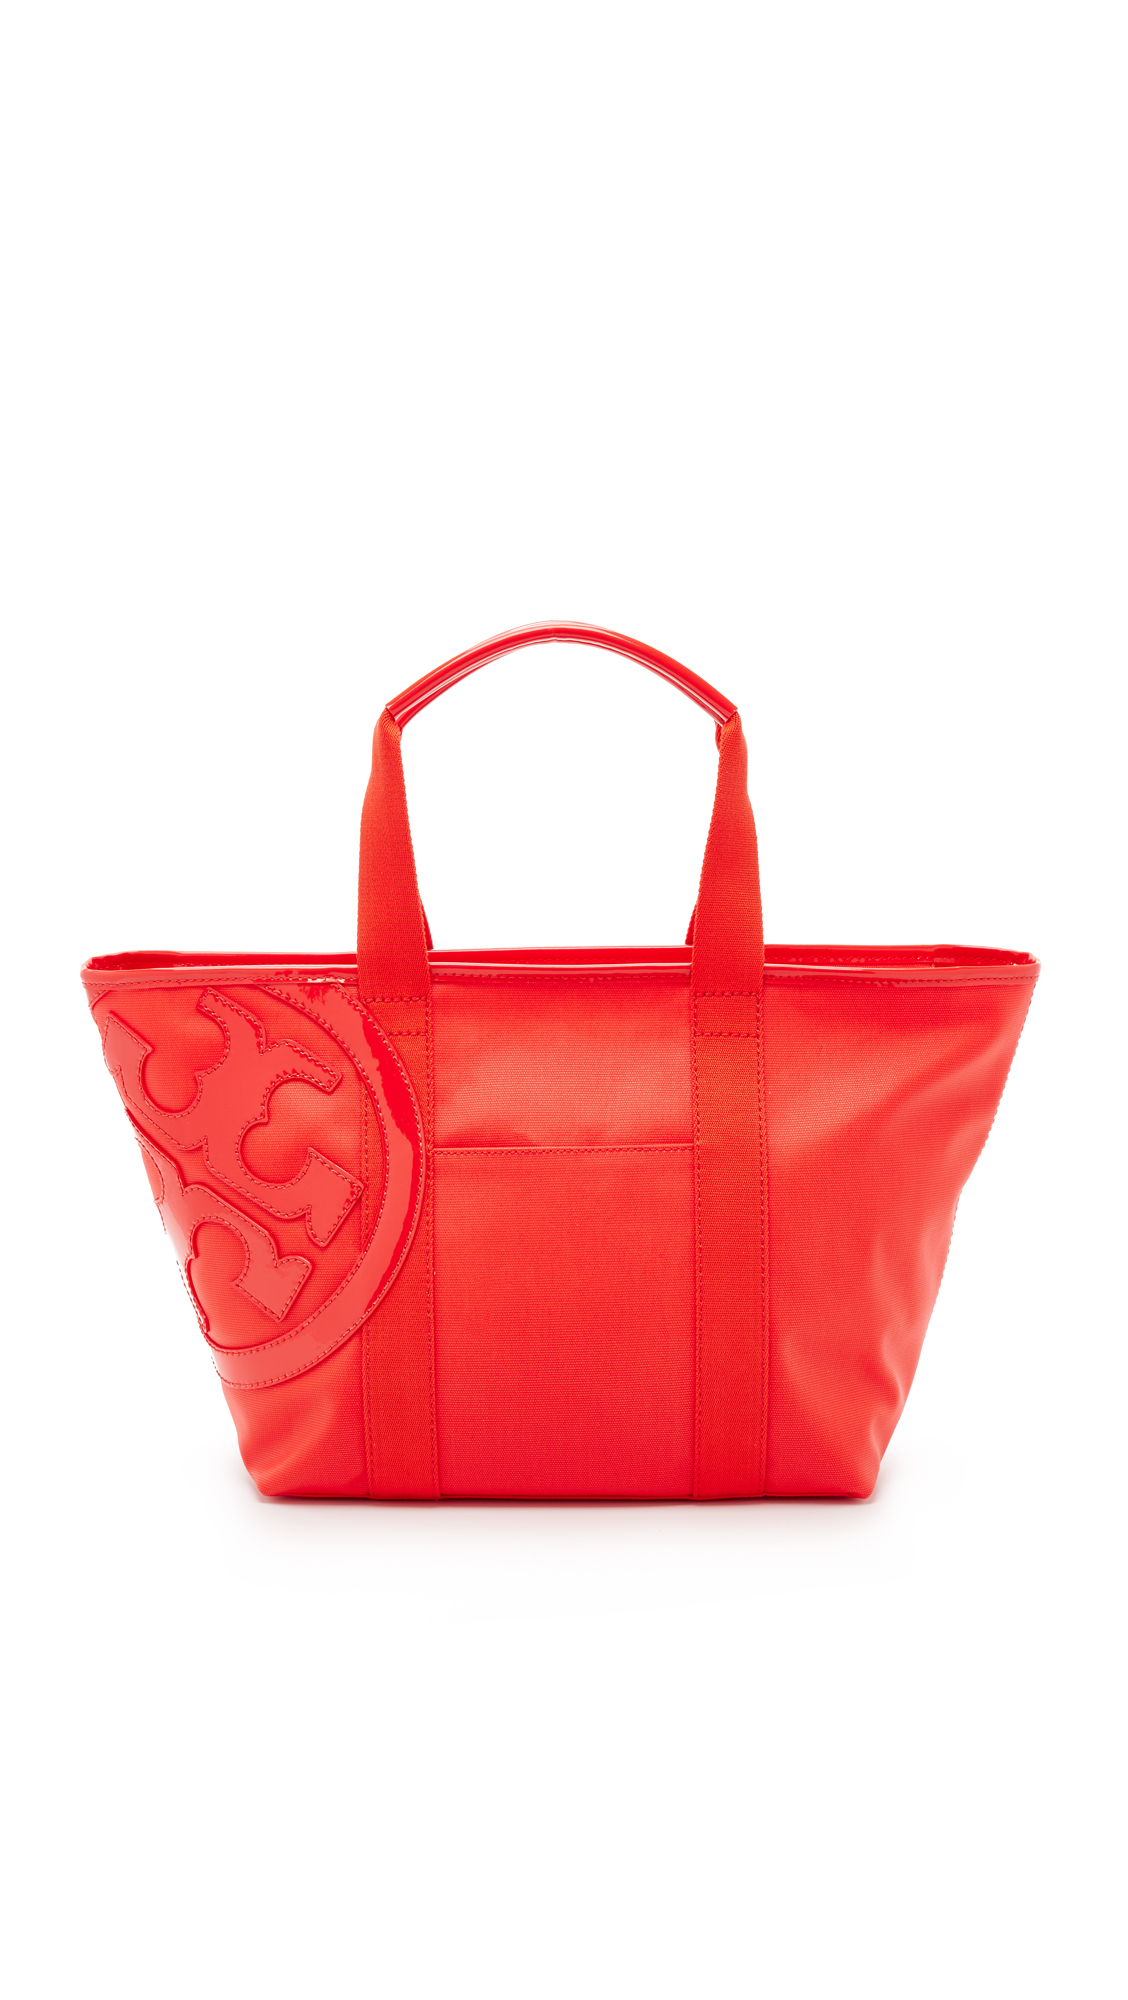 Tory Burch Beach Canvas Tote in Red | Lyst